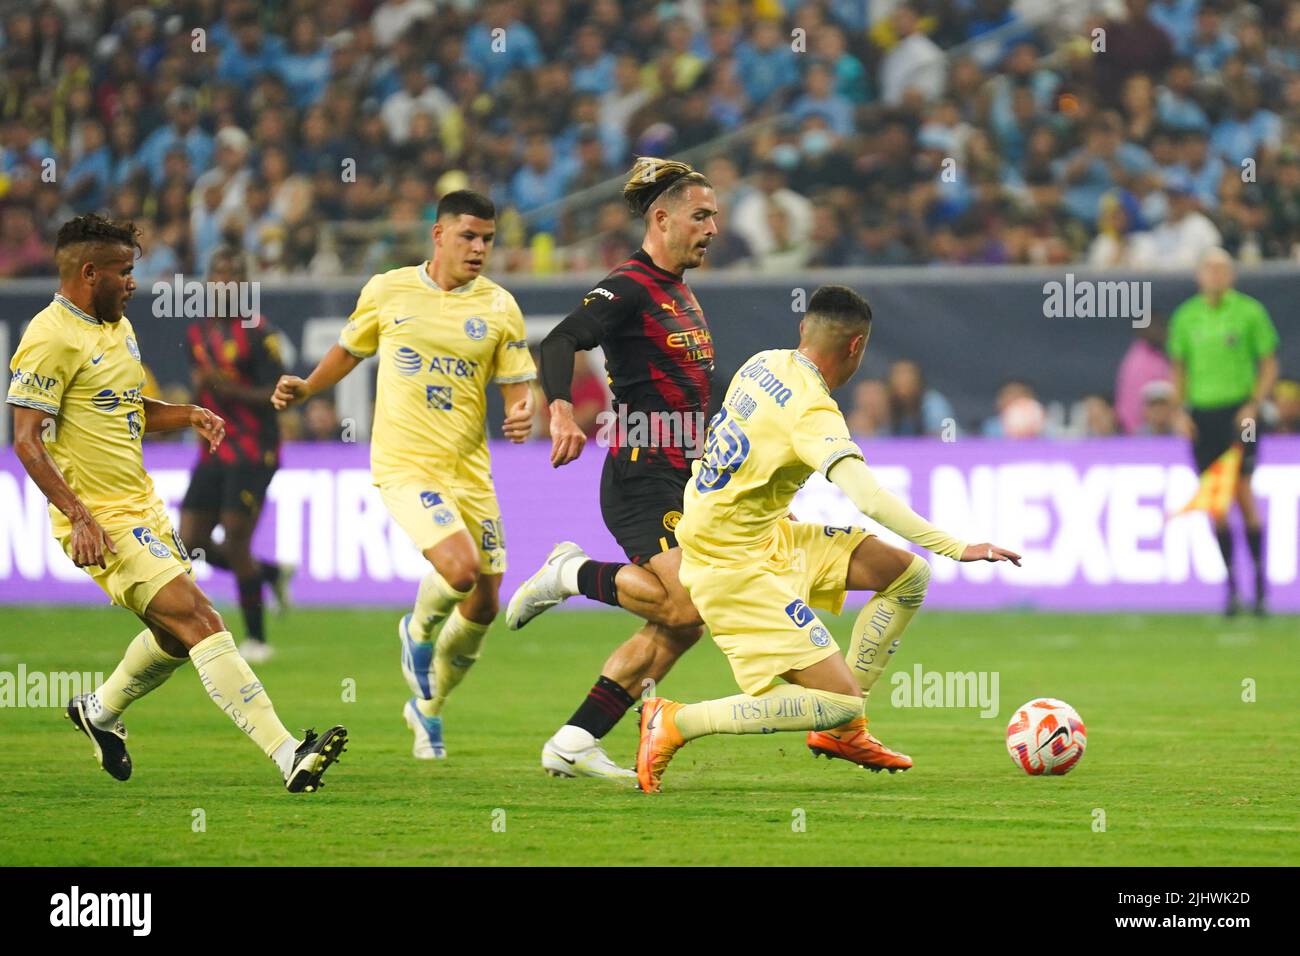 Manchester City's Jack Grealish (left) and Club America's Emilio Lara battle for the ball during a pre-season friendly match at NRG Stadium, Houston. Picture date: Wednesday July 20, 2022. Stock Photo